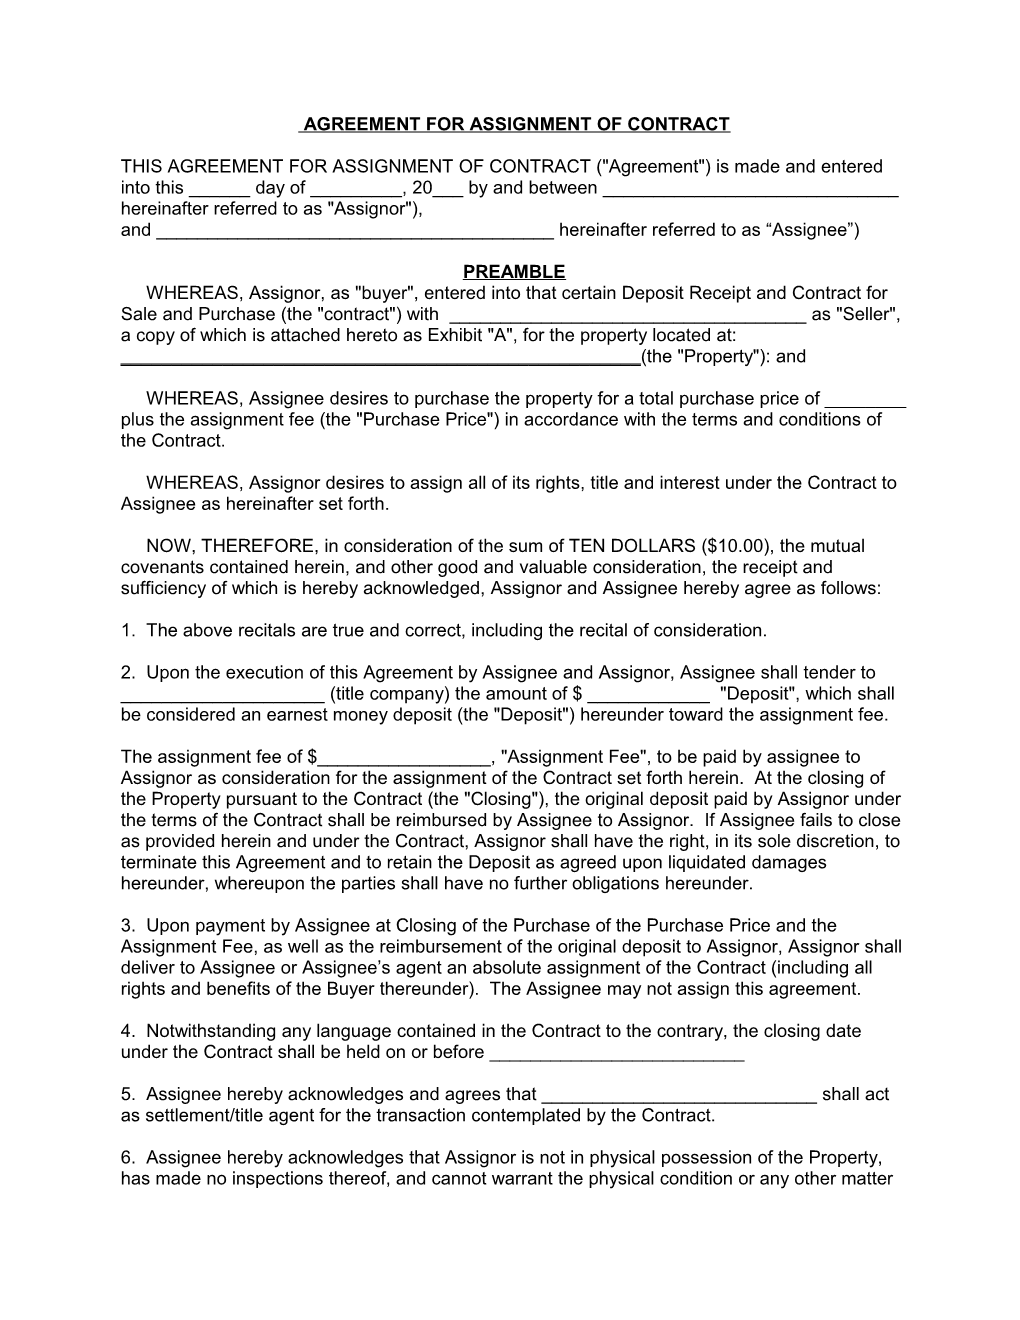 Agreement for Assignment of Contract